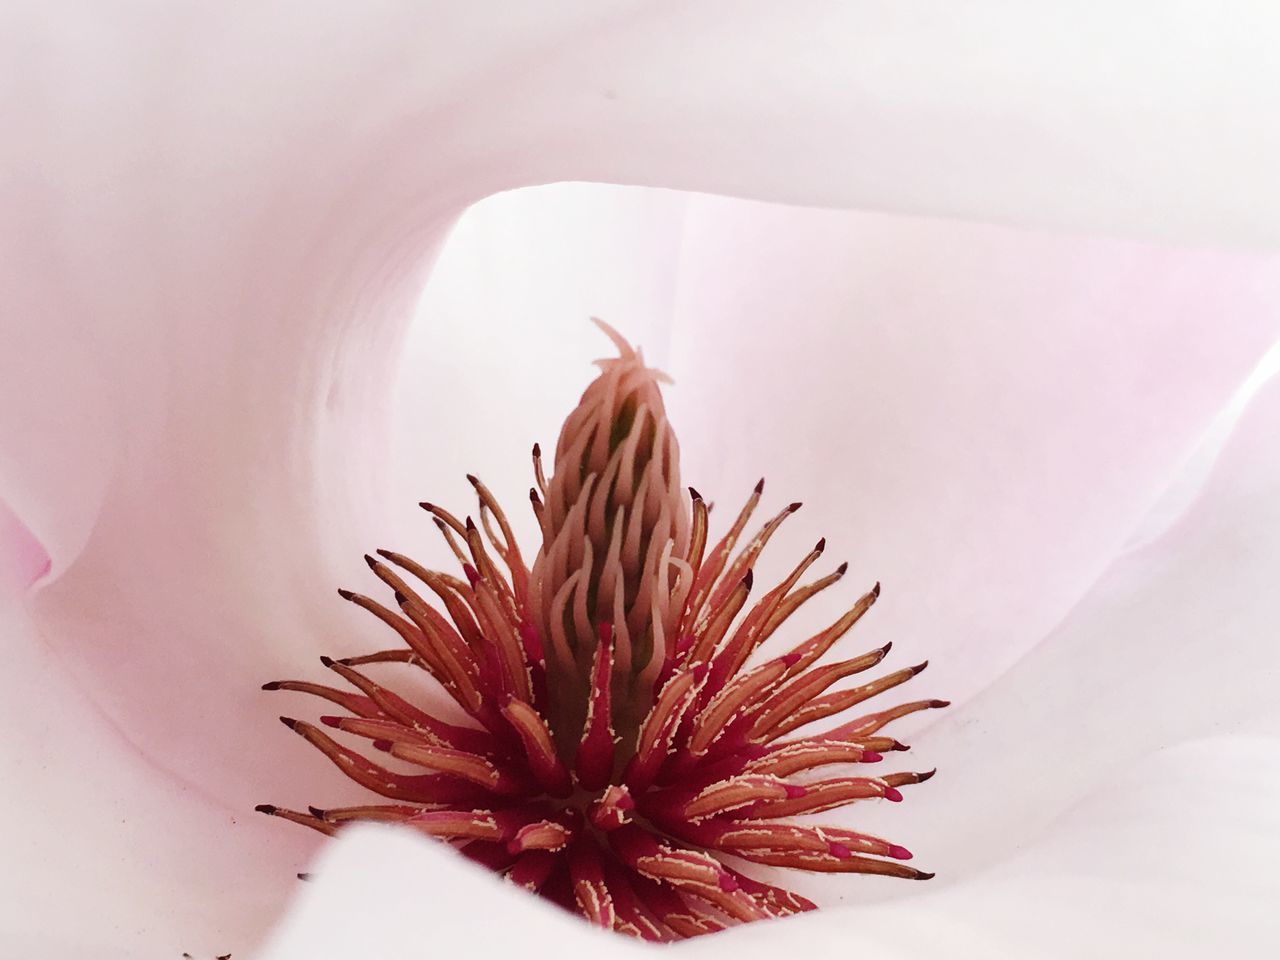 plant, flowering plant, flower, close-up, fragility, vulnerability, freshness, beauty in nature, pink color, indoors, no people, petal, nature, flower head, growth, inflorescence, pollen, selective focus, maroon